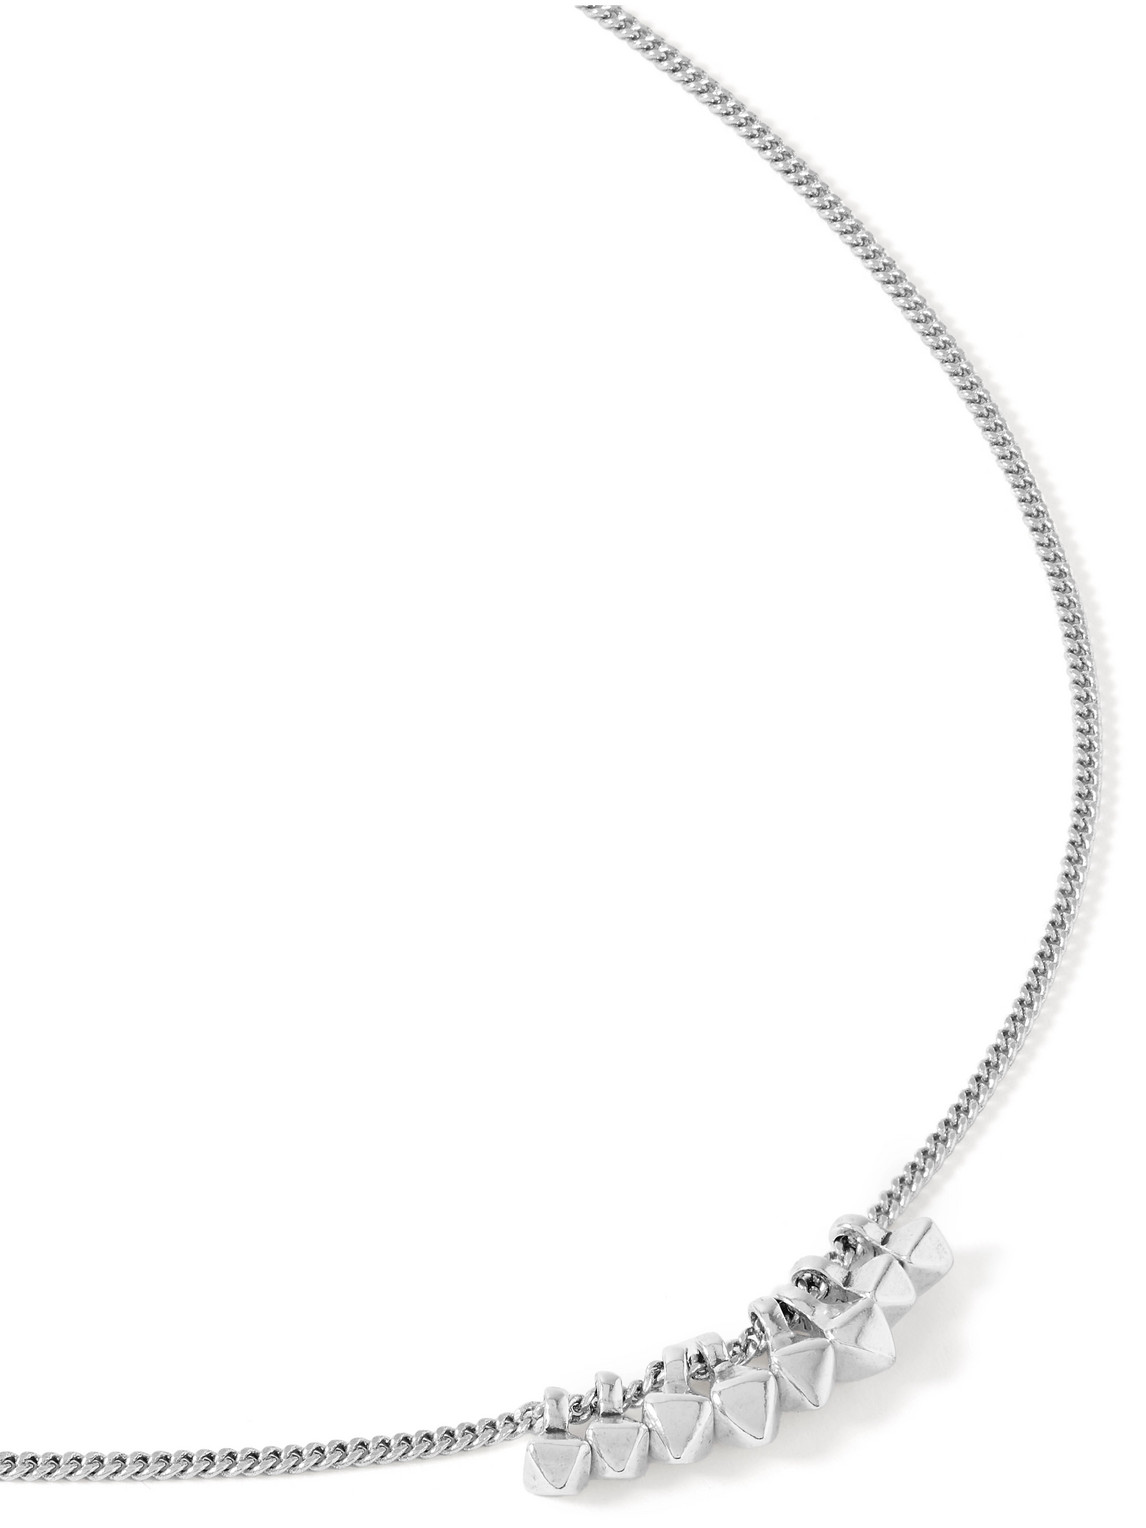 All Singing Silver-Tone Chain Necklace